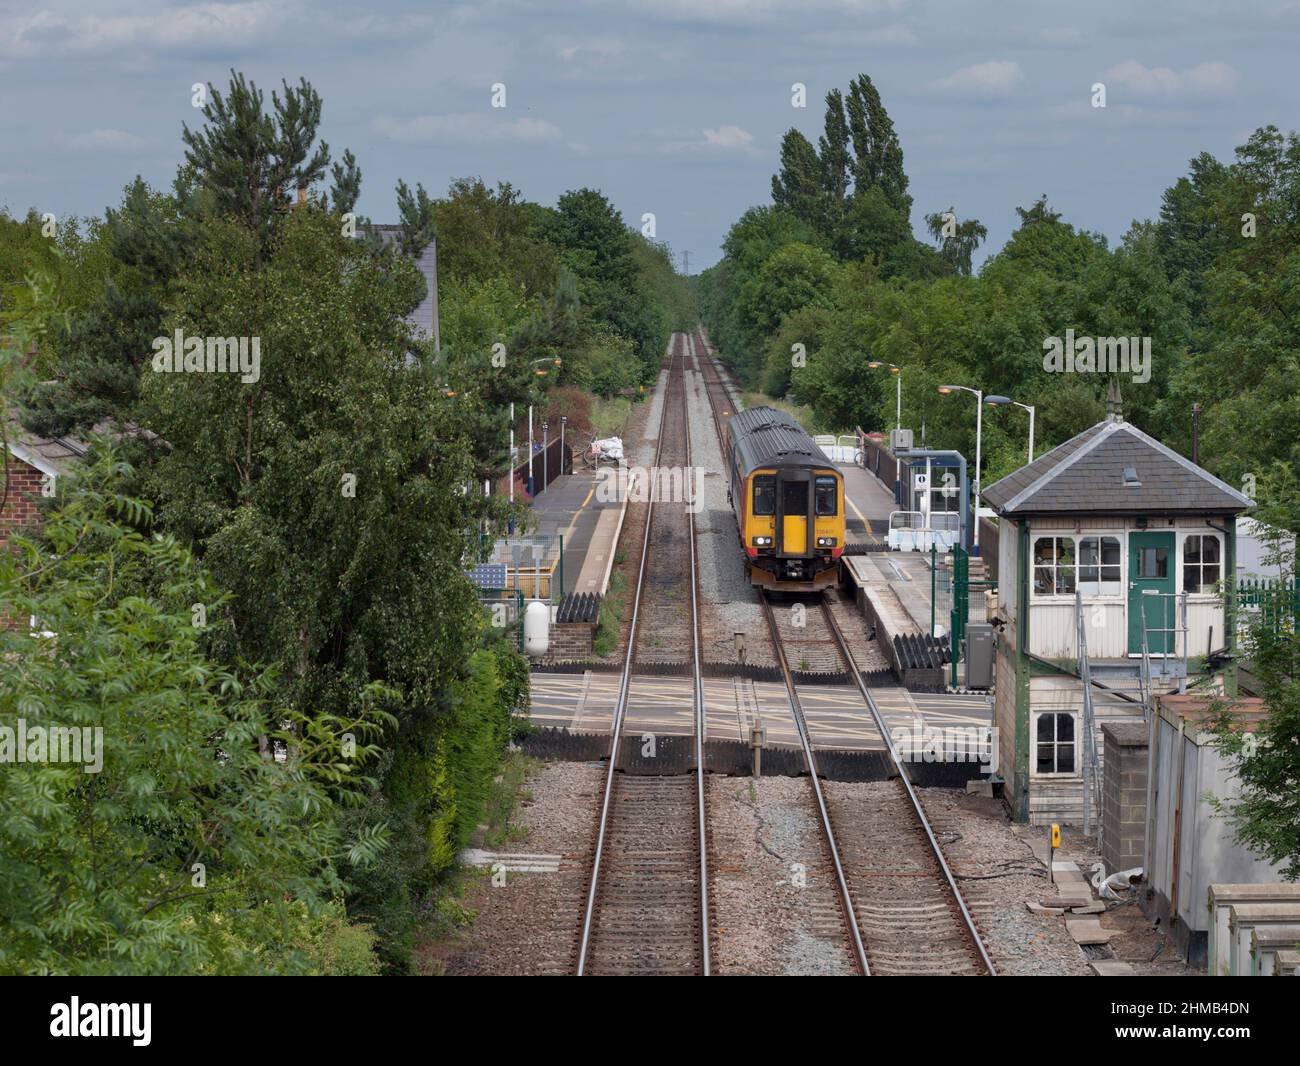 East Midlands trains class 156 sprinter train 156405 at Lowdham railway station (East of Nottingham)  with the level crossing and closed signal box Stock Photo